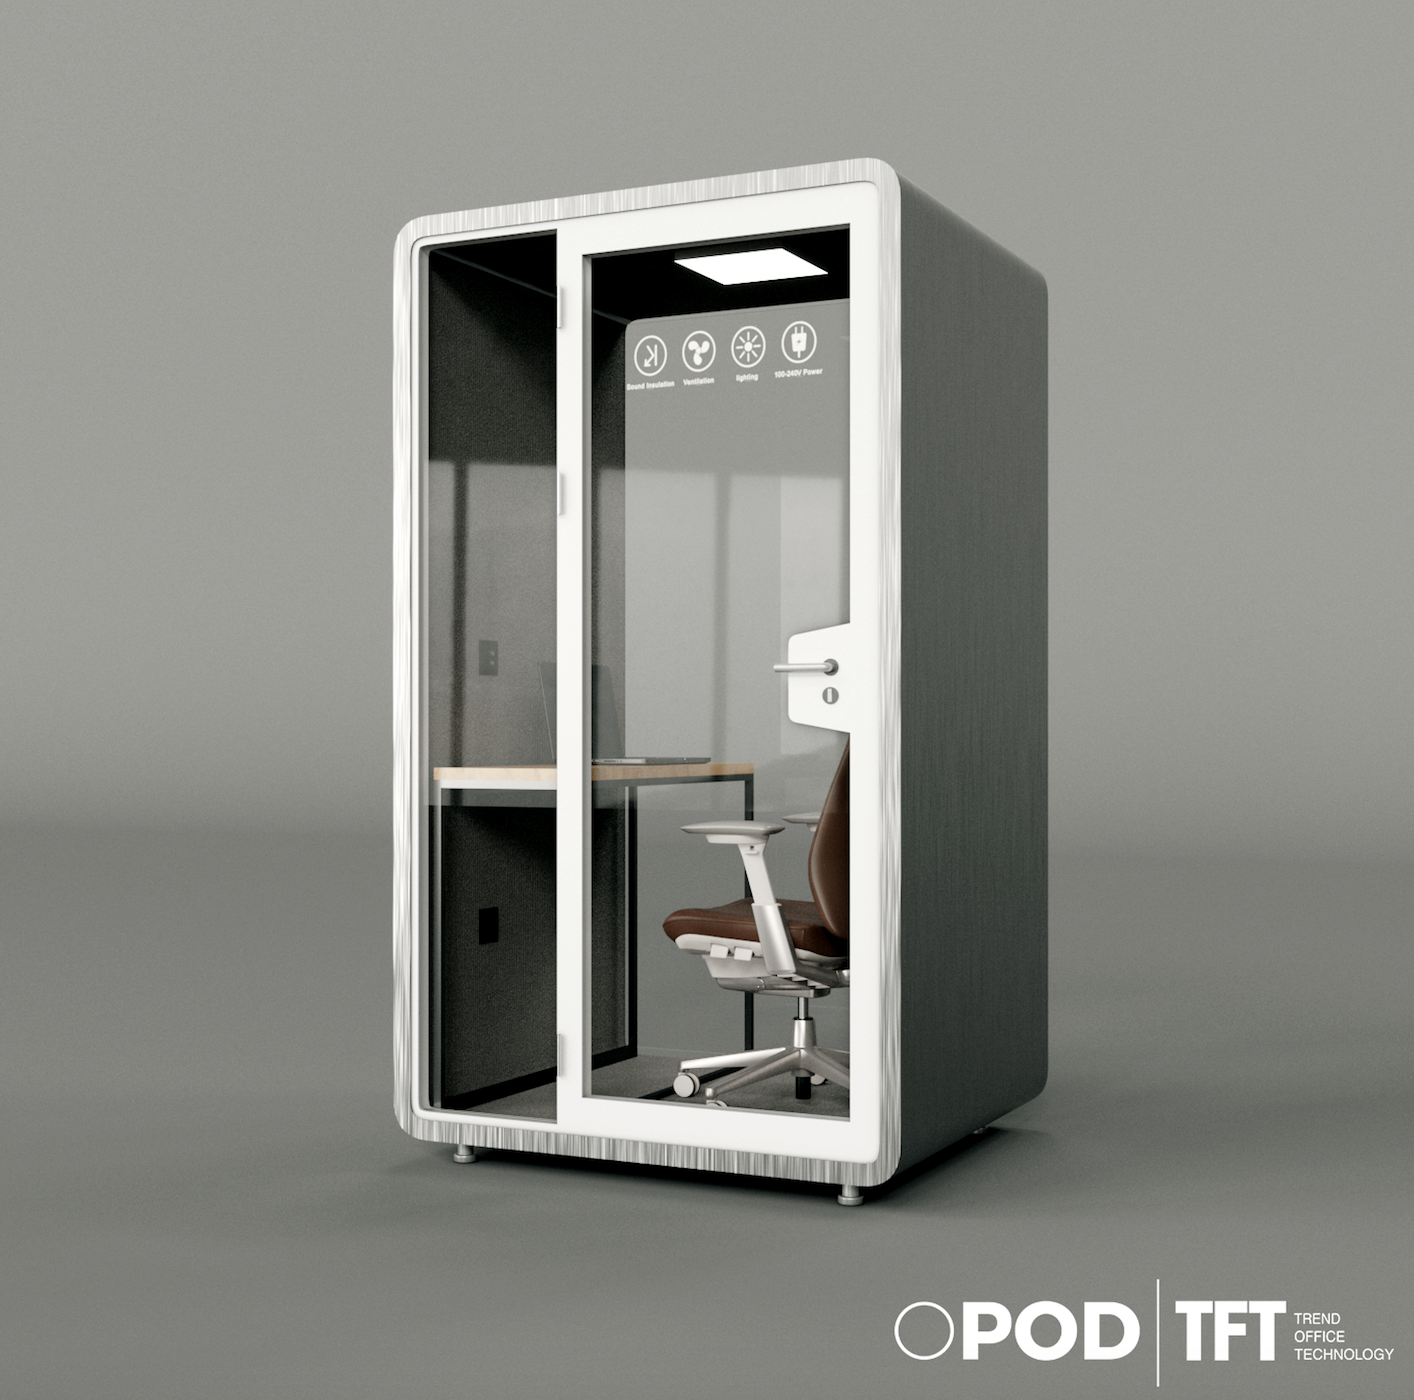 Soundproof Office Booth Home Office Pod Australia: Sydney, Melbourne, Brisbane, Perth, Adelaide, Gold Coast, Newcastle, Canberra, New Zealand